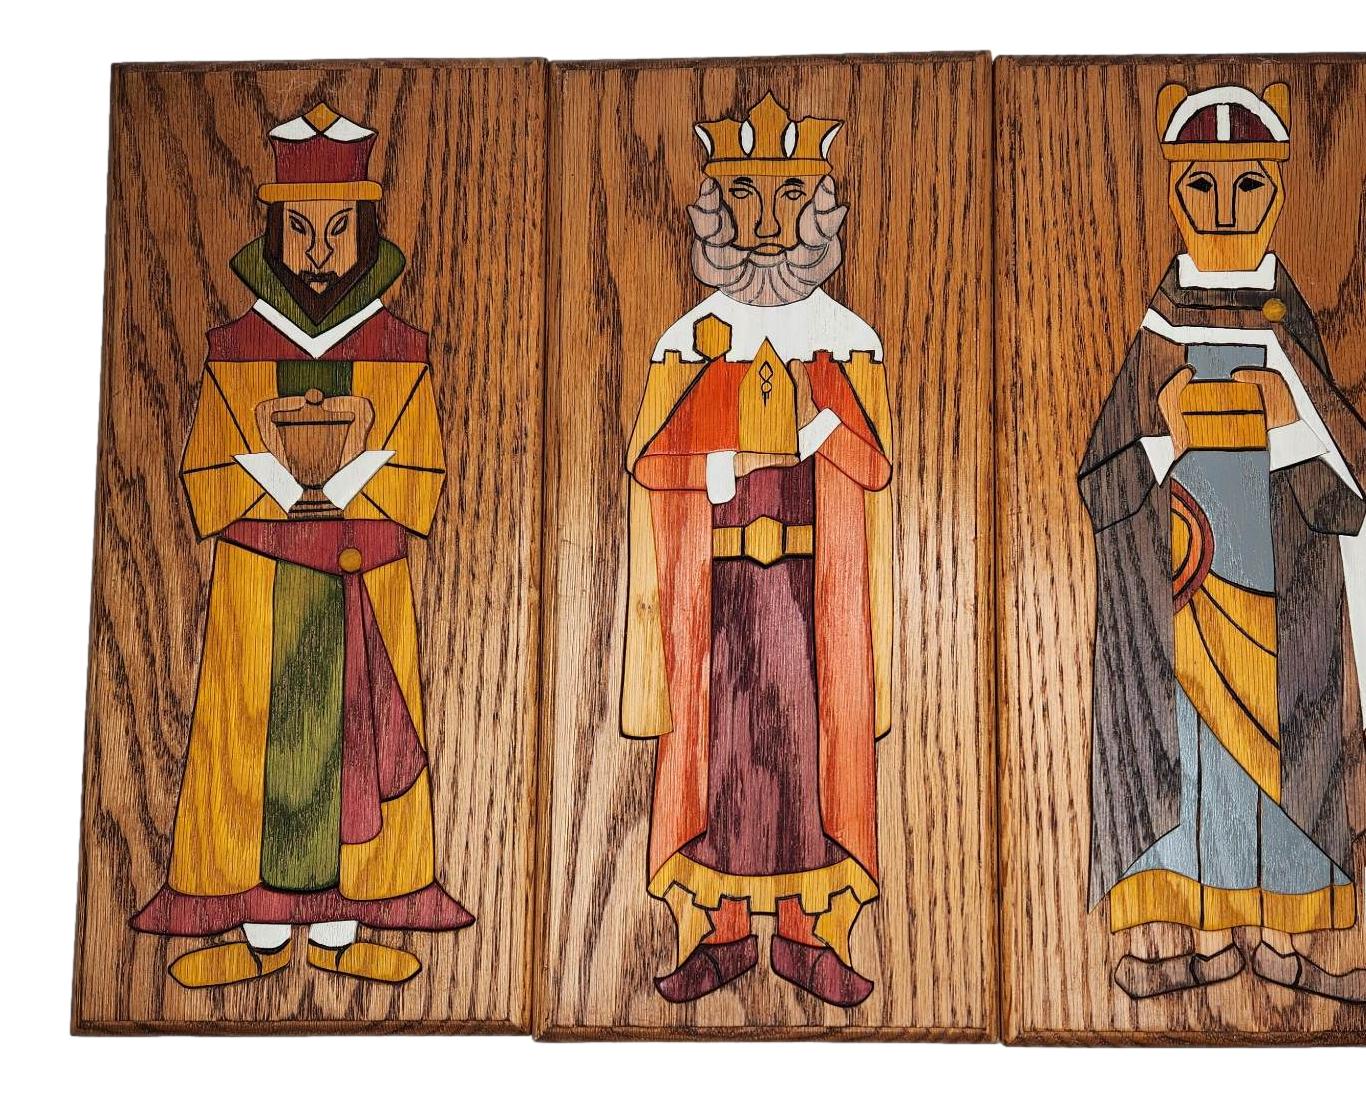 Wood Plaque Set of 3 Three Kings L: 13 inches X W: 6 inches - Ysleta Mission Gift Shop- VOTED 2022 El Paso's Best Gift Shop